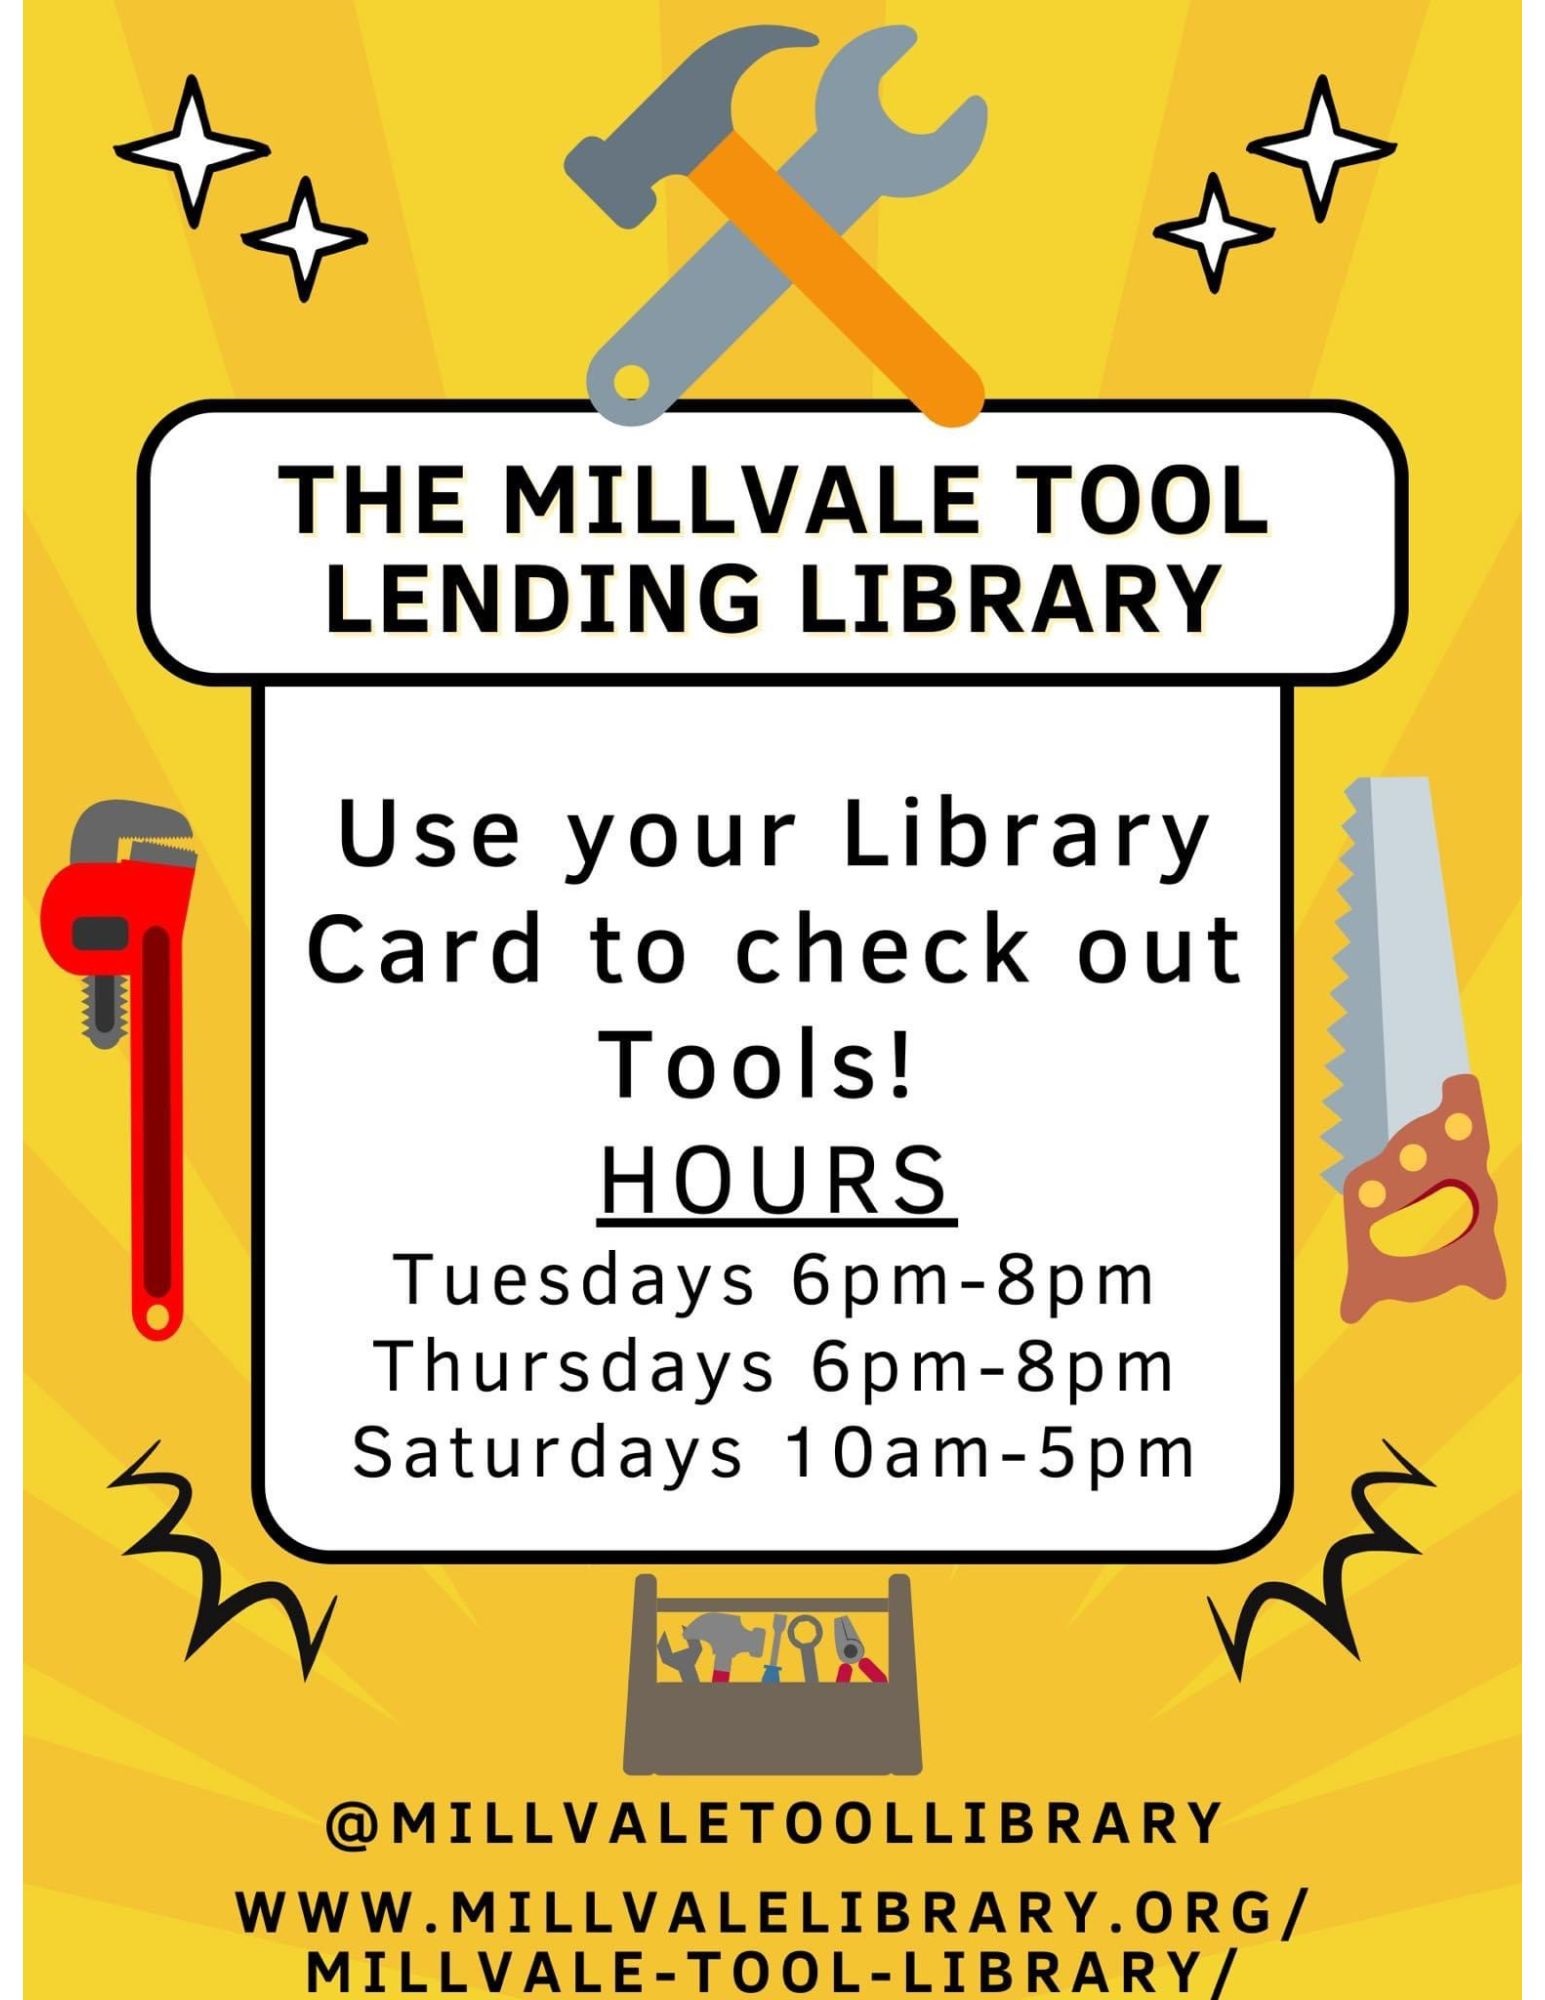 Use your library card to check out tools! A colorful flyer with tools and information on the Tool Lending Library's hours Tues and Thurs 6:00pm-8:00pm and Sat 10:00am-5:00pm